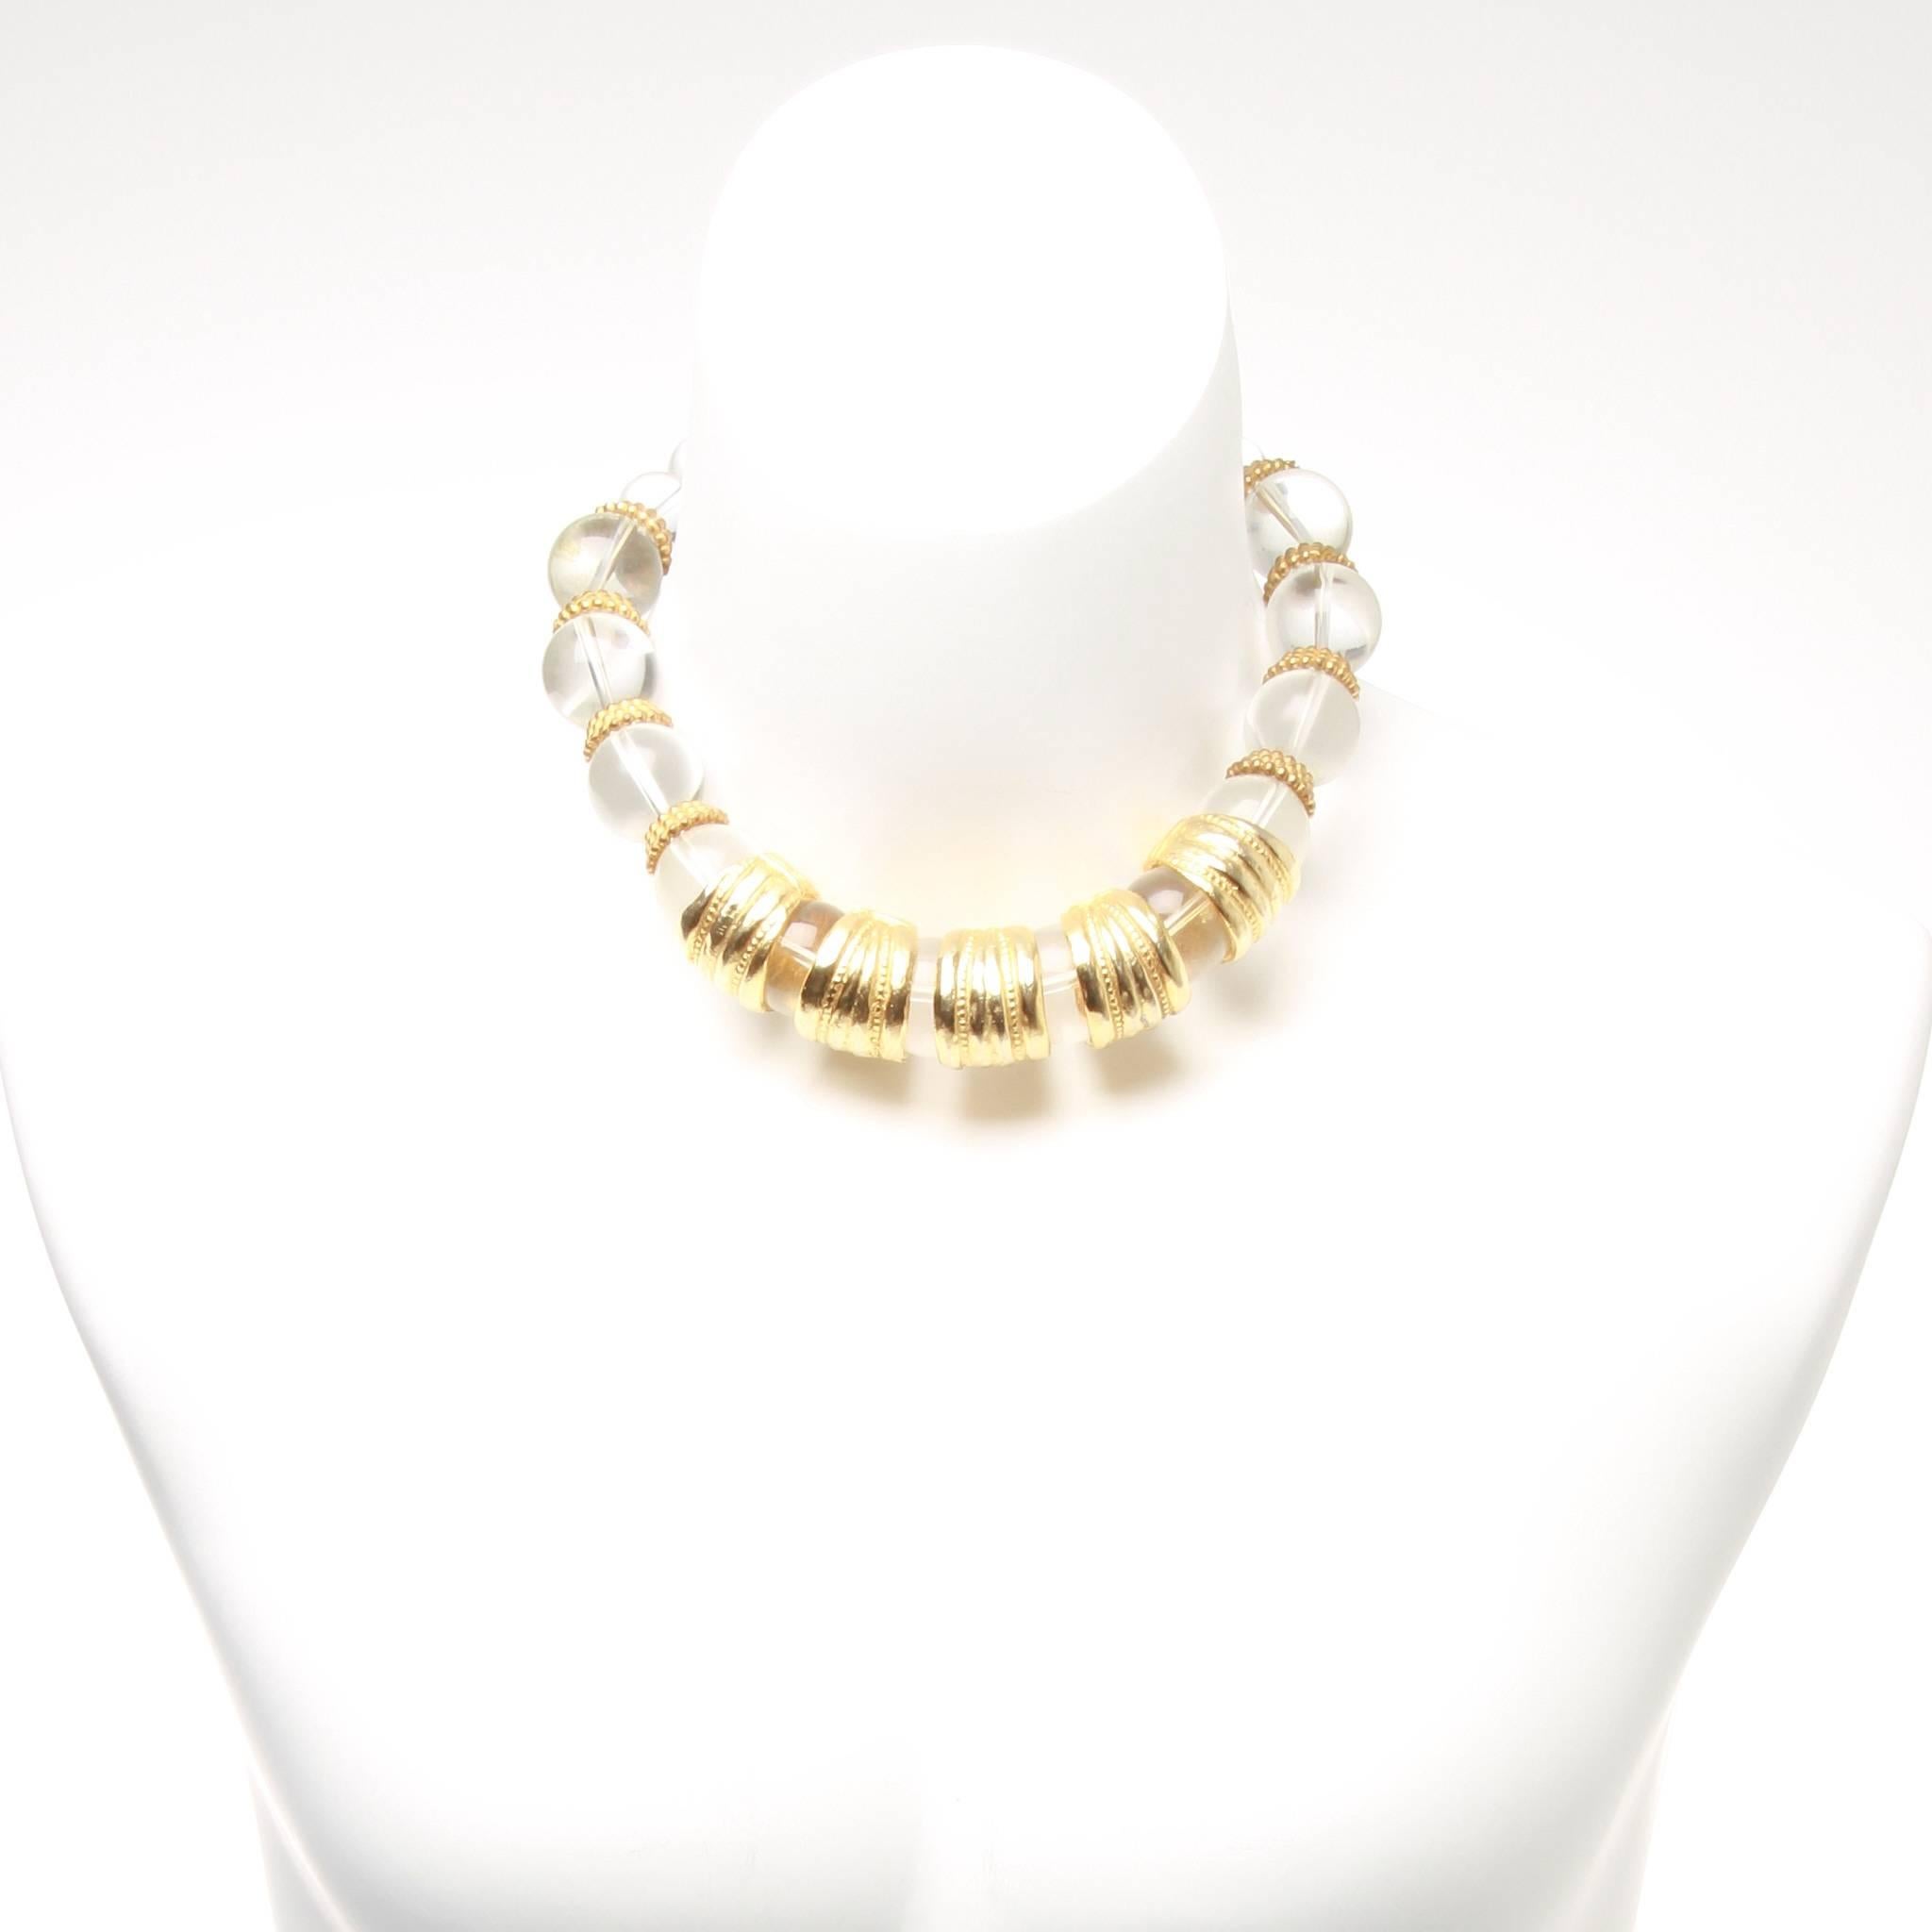 Beautiful Christian Dior tapered spherical crystal cocktail necklace with gold plated spacer beads.

Fastener: Spring ring closure with CD charm. 

Choker length